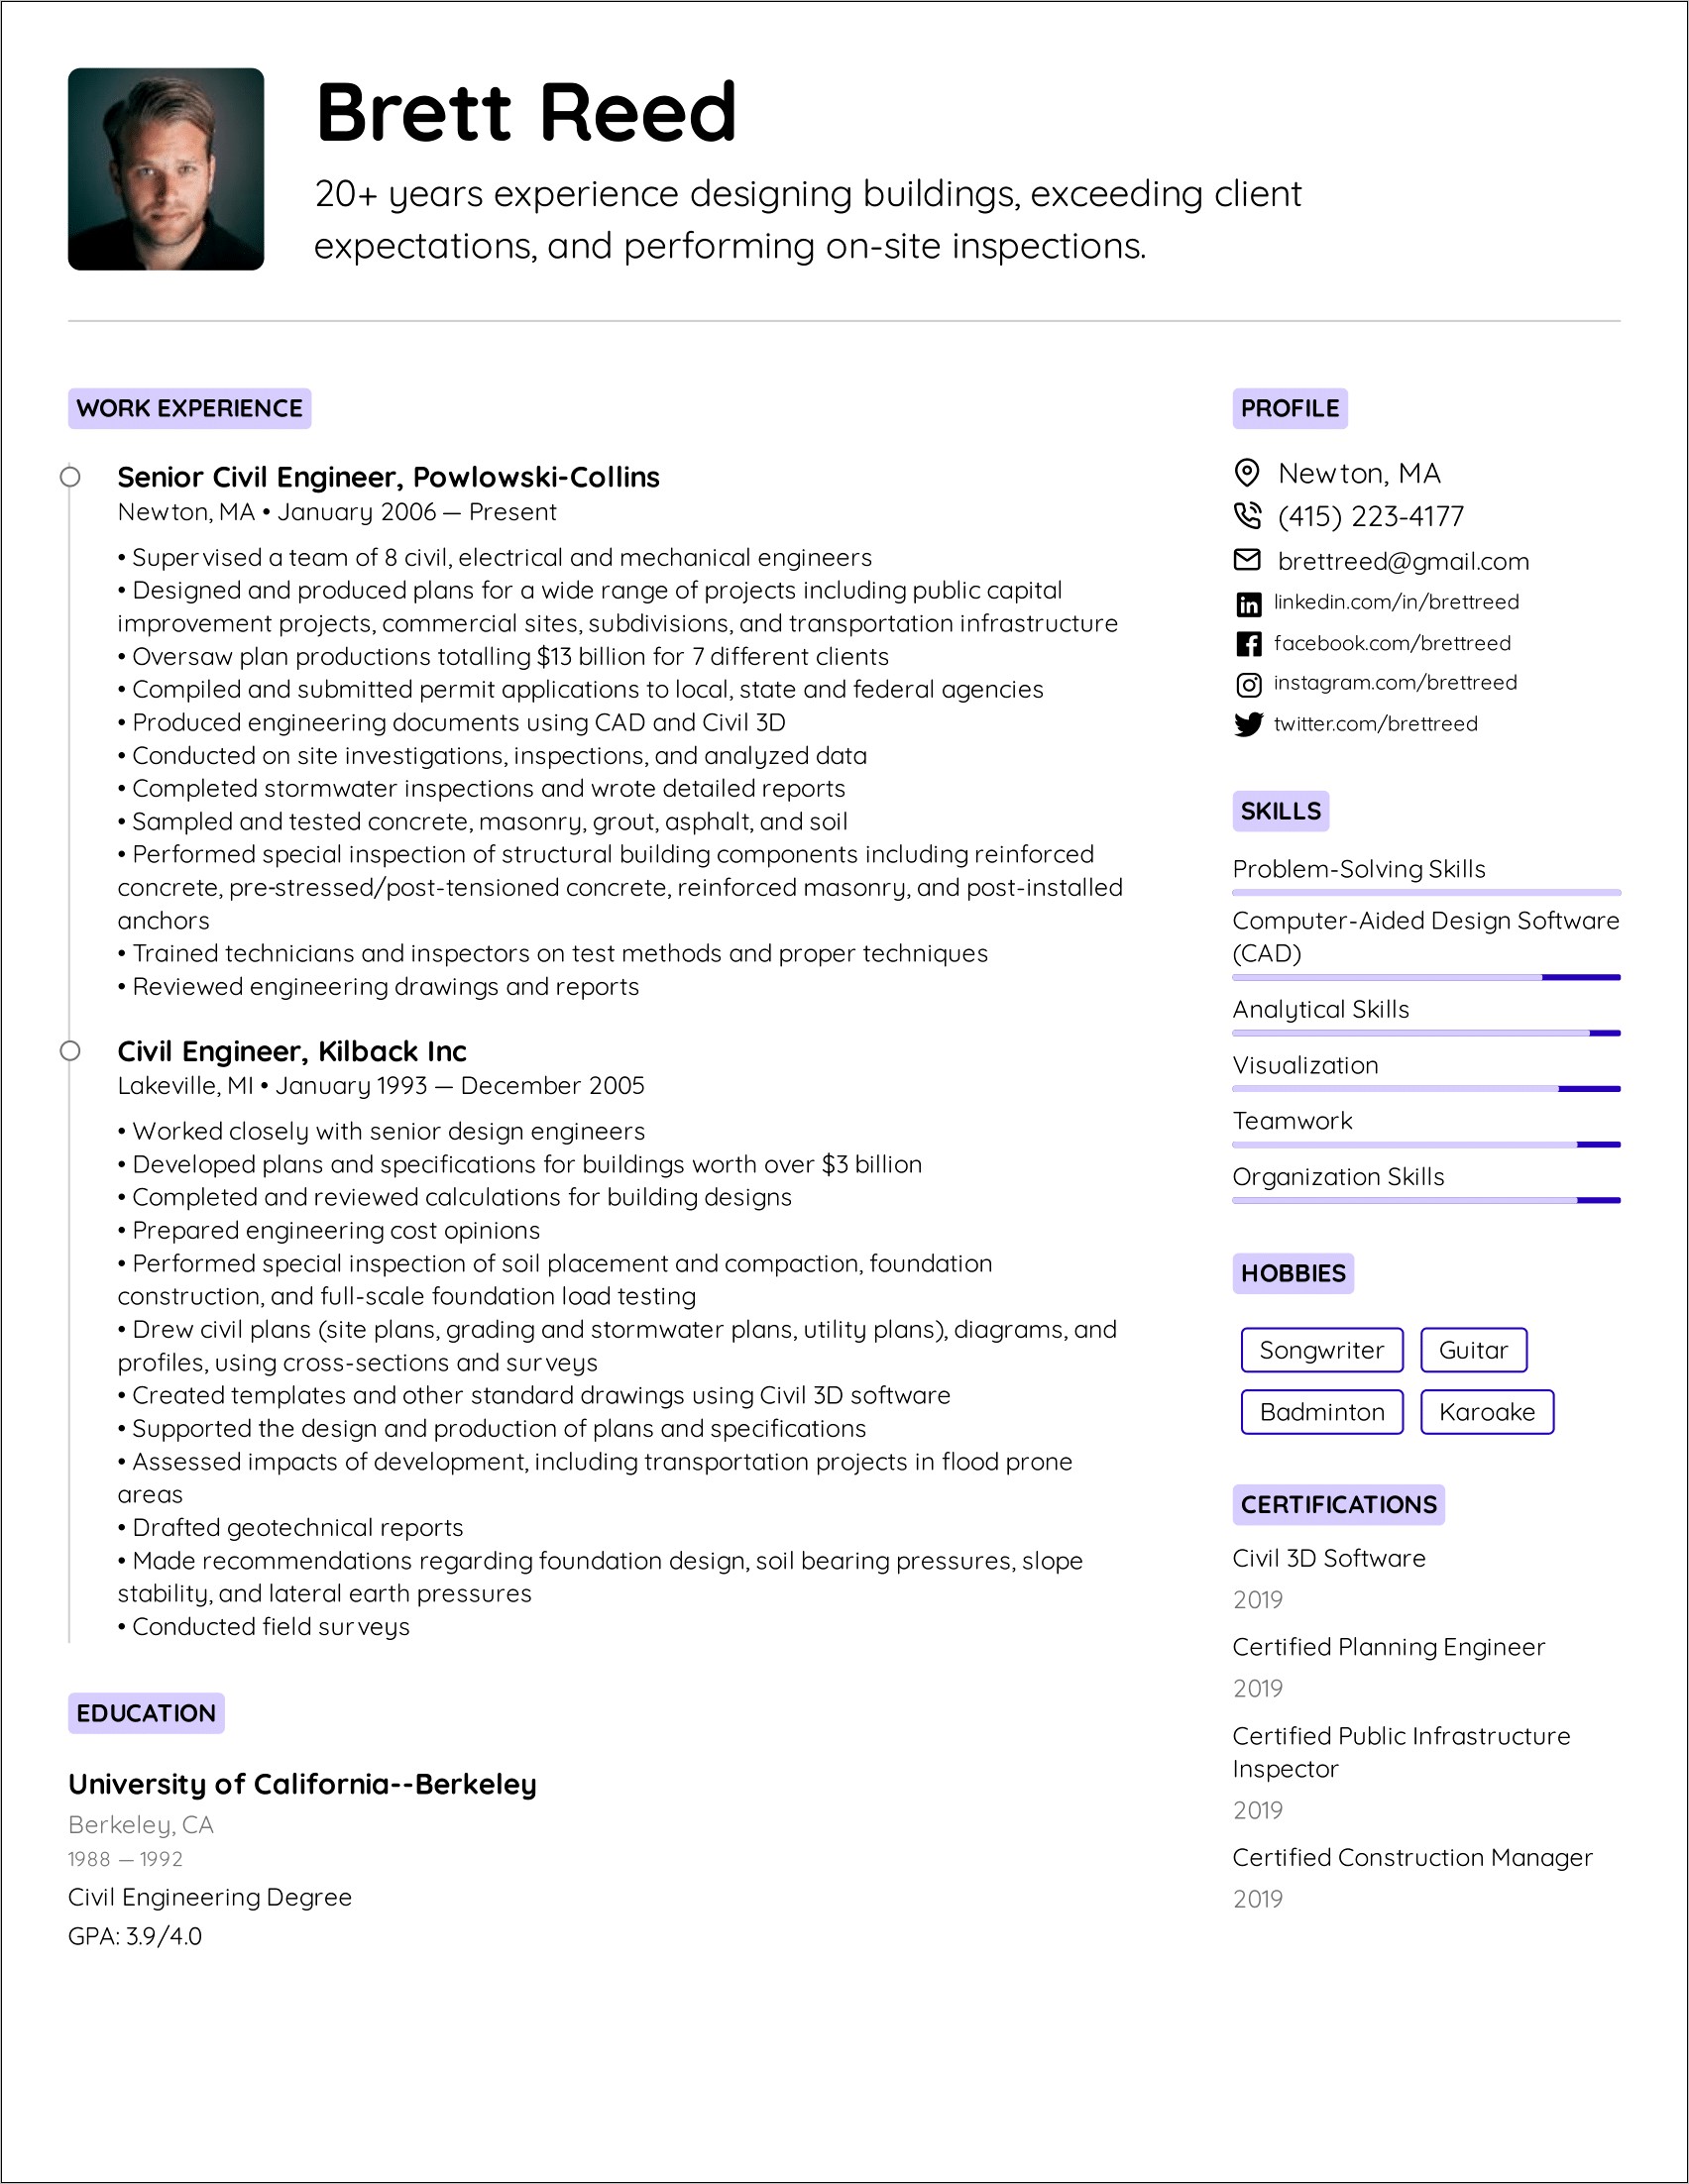 Sample Resumes 20+ Years Experience